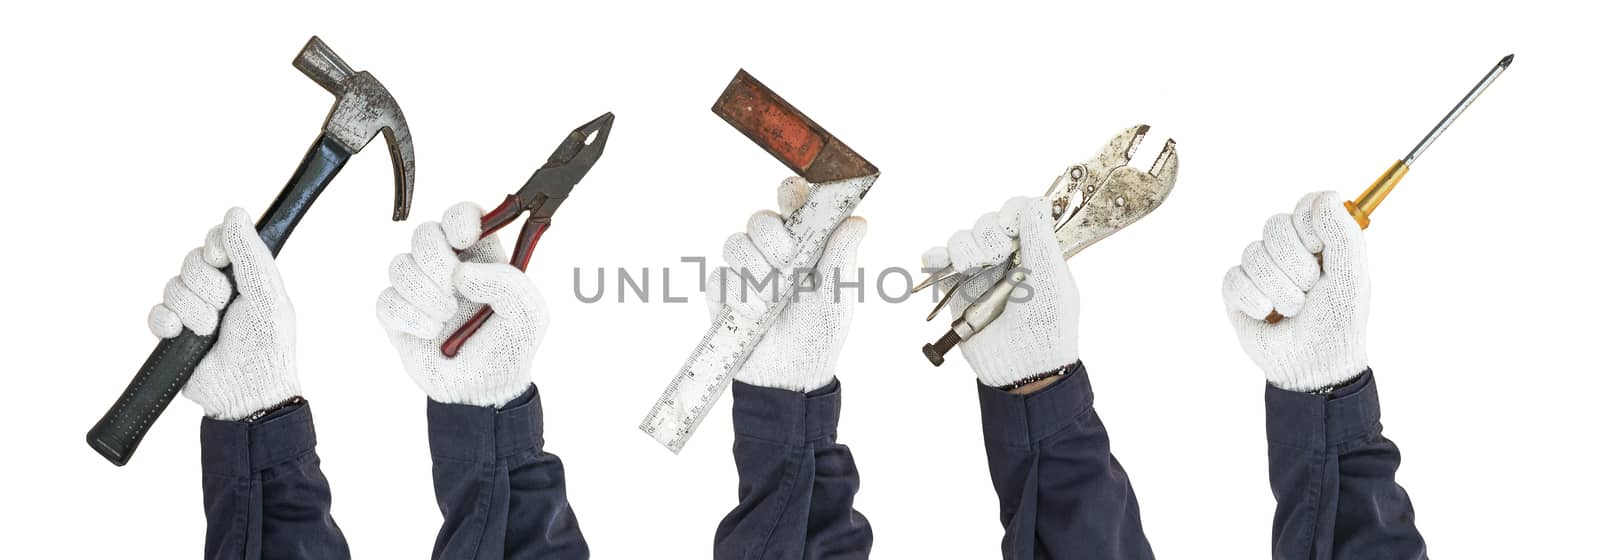 Set of working hand in glove holding tools by stoonn